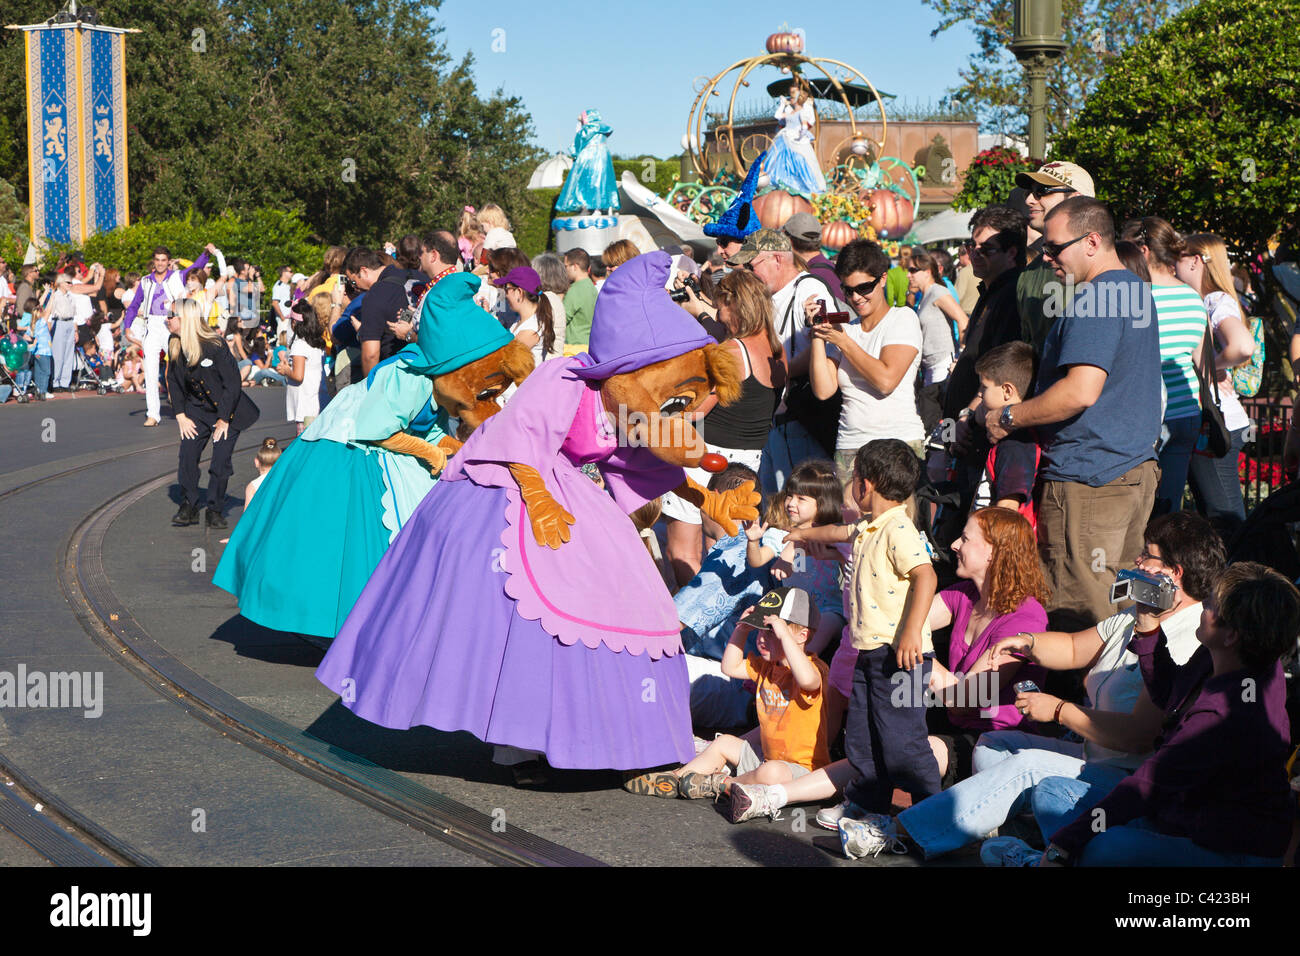 Disney characters walk in 'A Dream Come True' parade at the Magic Kingdom in Disney World, Kissimmee, Florida Stock Photo